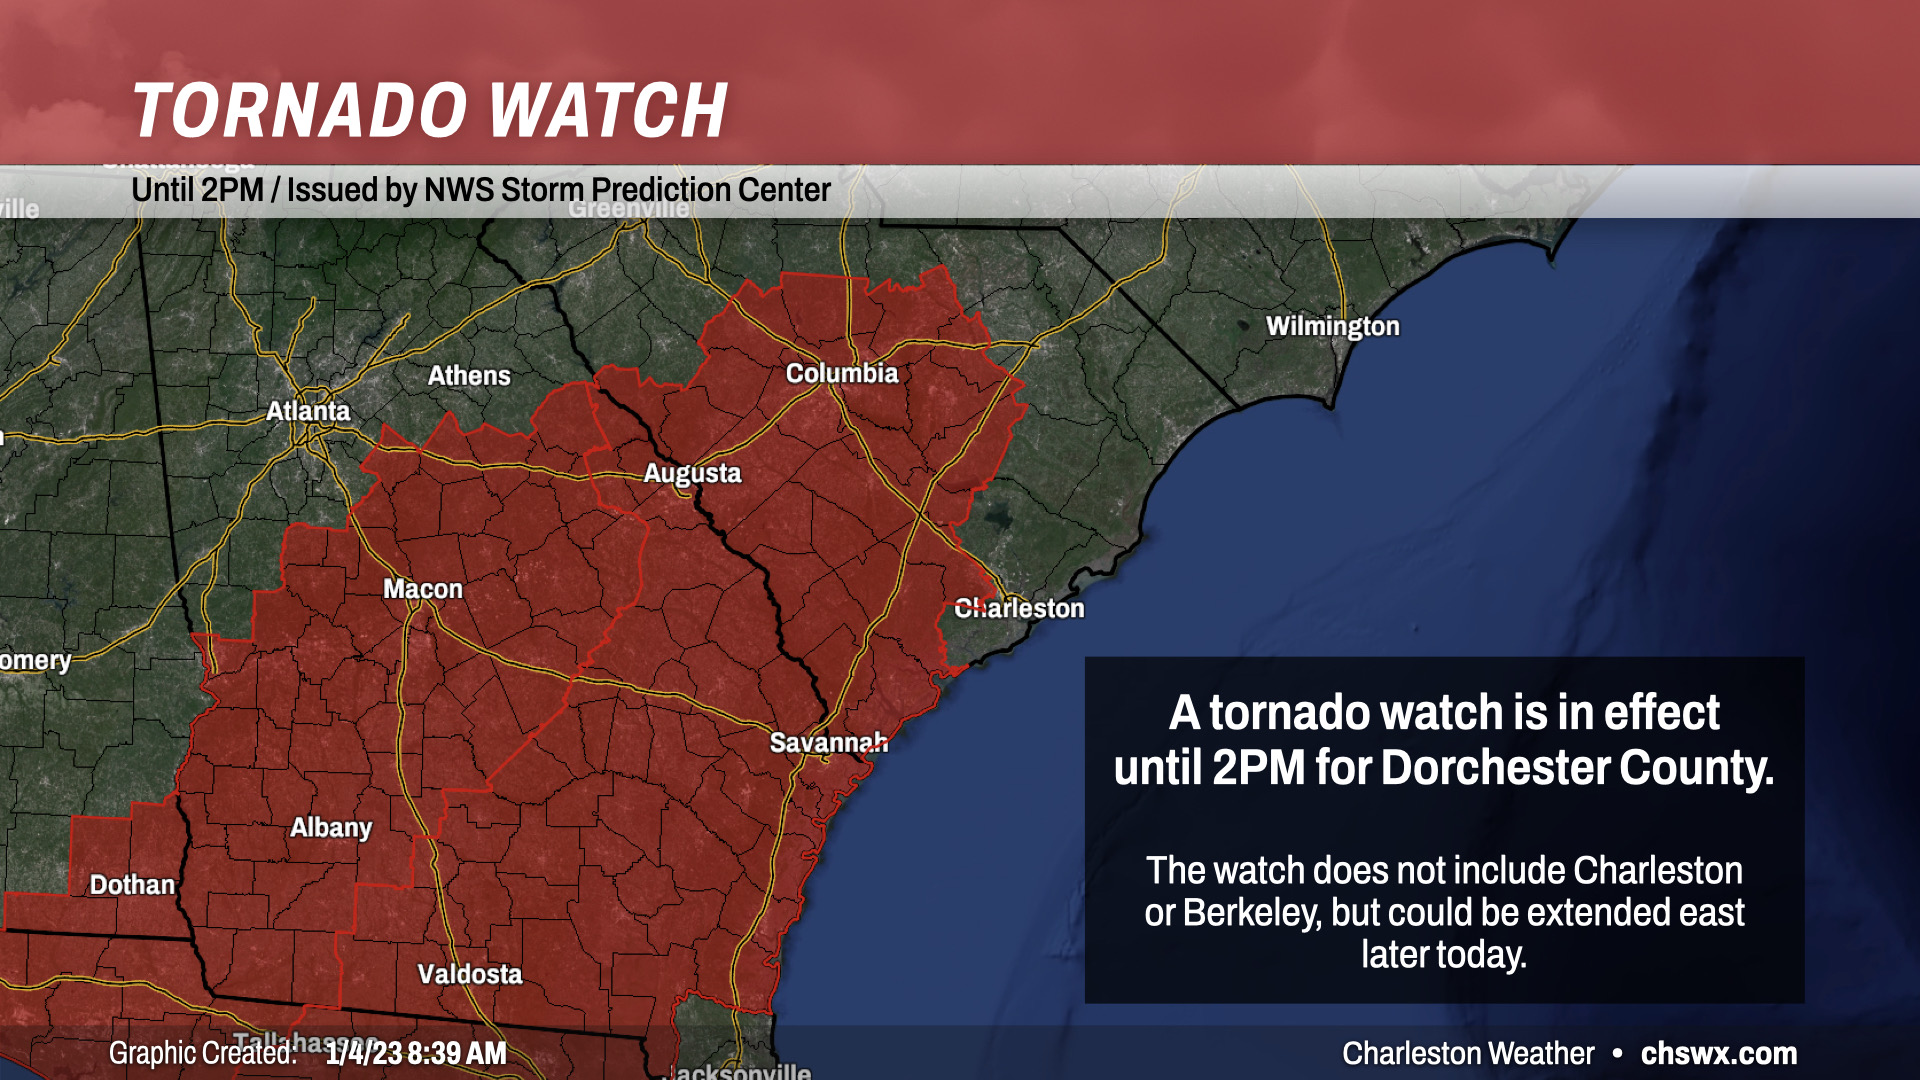 Map depicting a Tornado Watch in effect until 2PM, which includes Dorchester County.